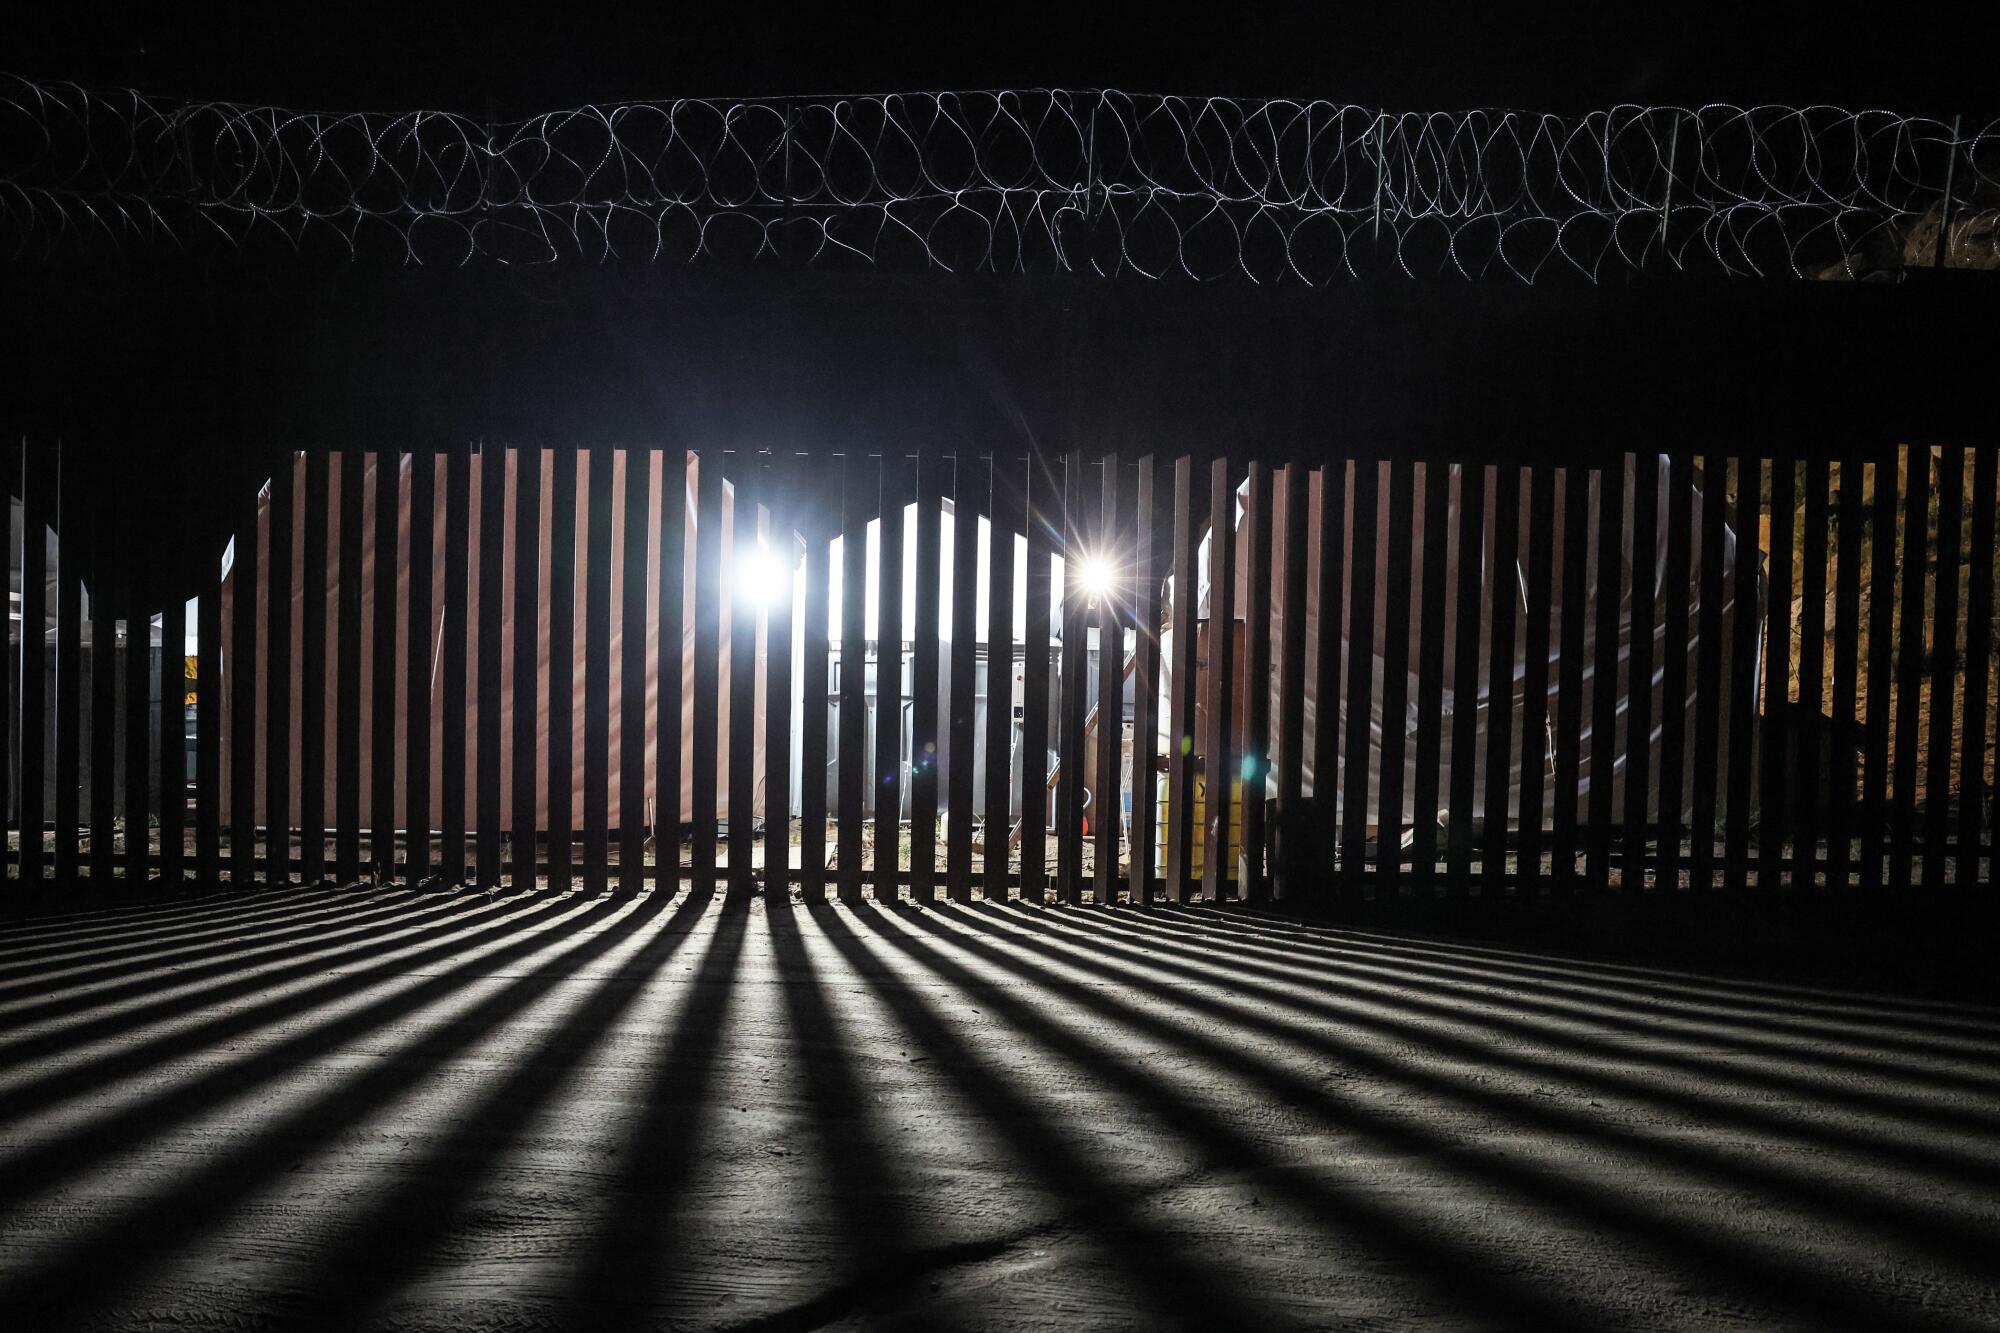 Lights shine through vertical slats of a fence at night.